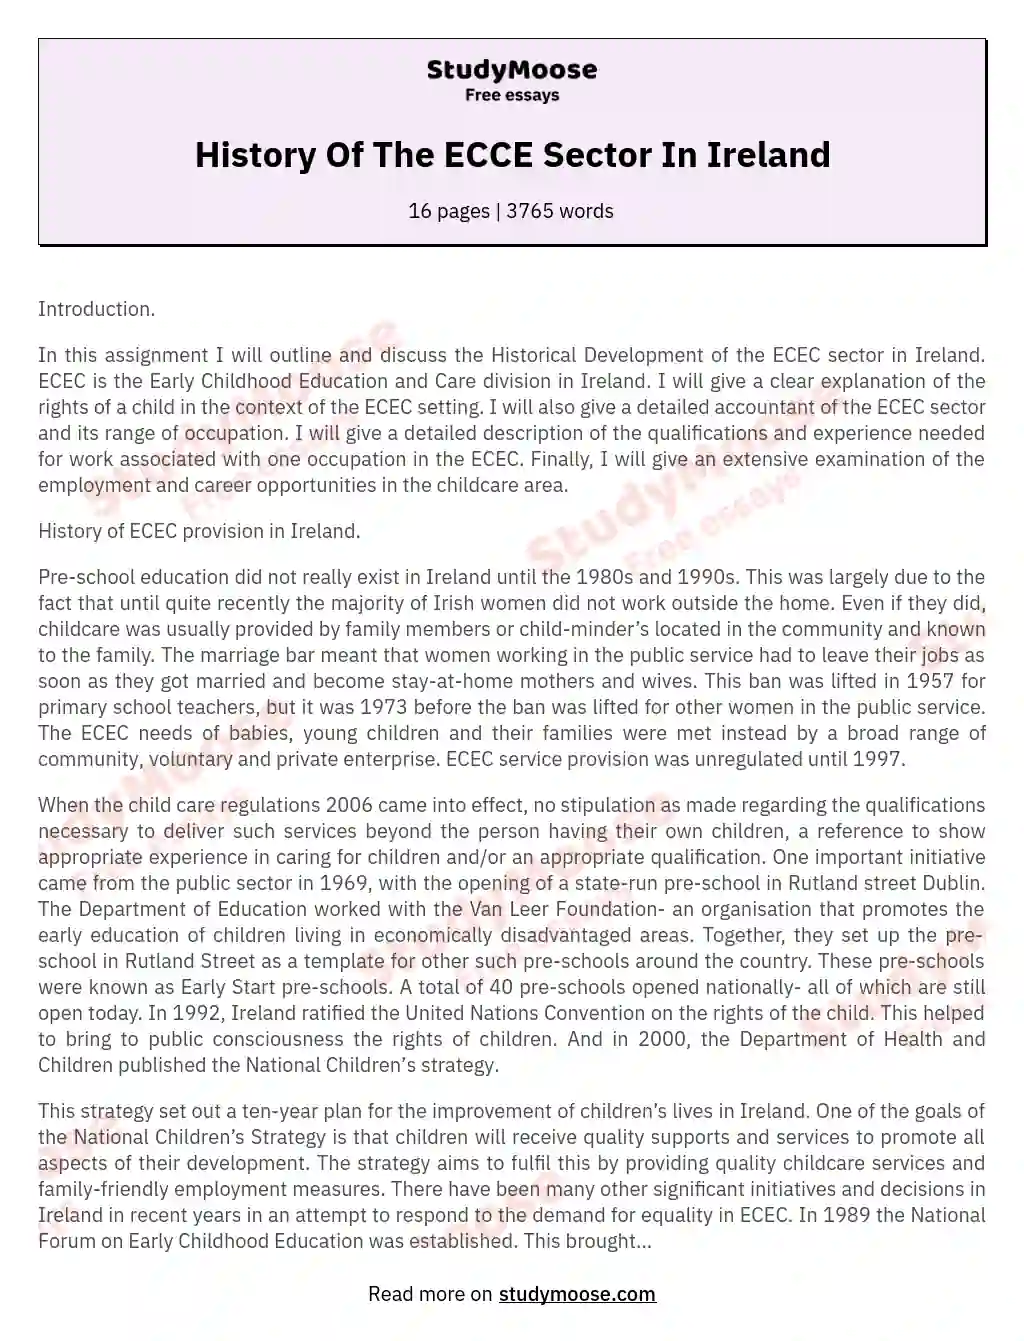 History Of The ECCE Sector In Ireland essay